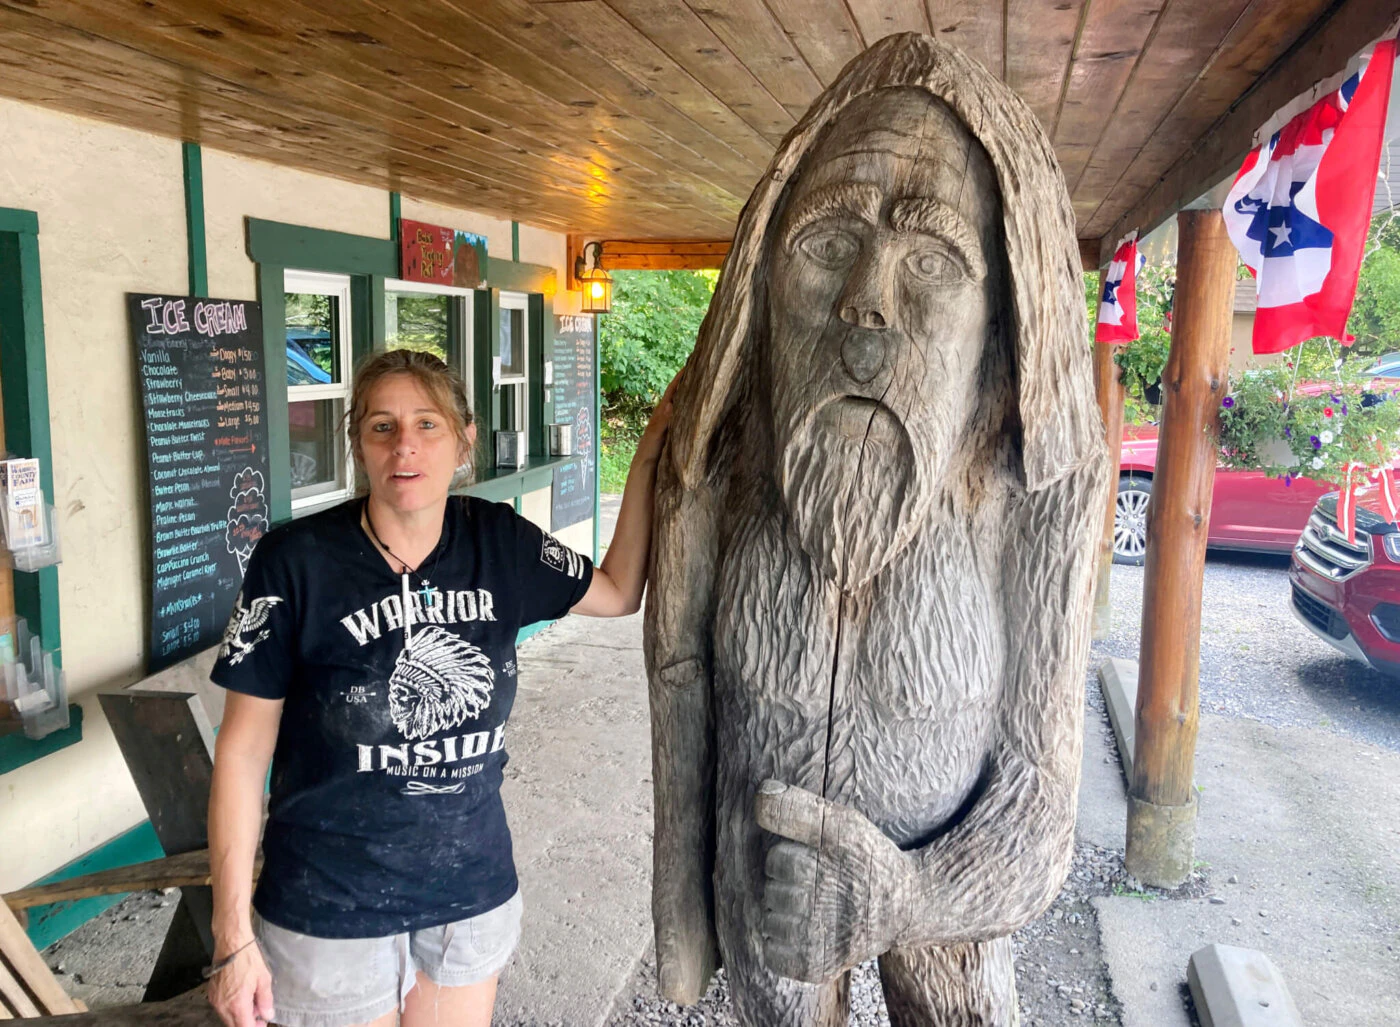 FILE - Pauline Bauer leans against a wooden statue outside Bob's Trading Post, her restaurant in Hamilton, Pa., July 21, 2021. Bauer, who screamed death threats directed at then-House Speaker Nancy Pelosi while storming the U.S. Capitol on Jan. 6, 2021, was sentenced on Tuesday to two years and three months in prison. (AP Photo/Michael Kunzelman)